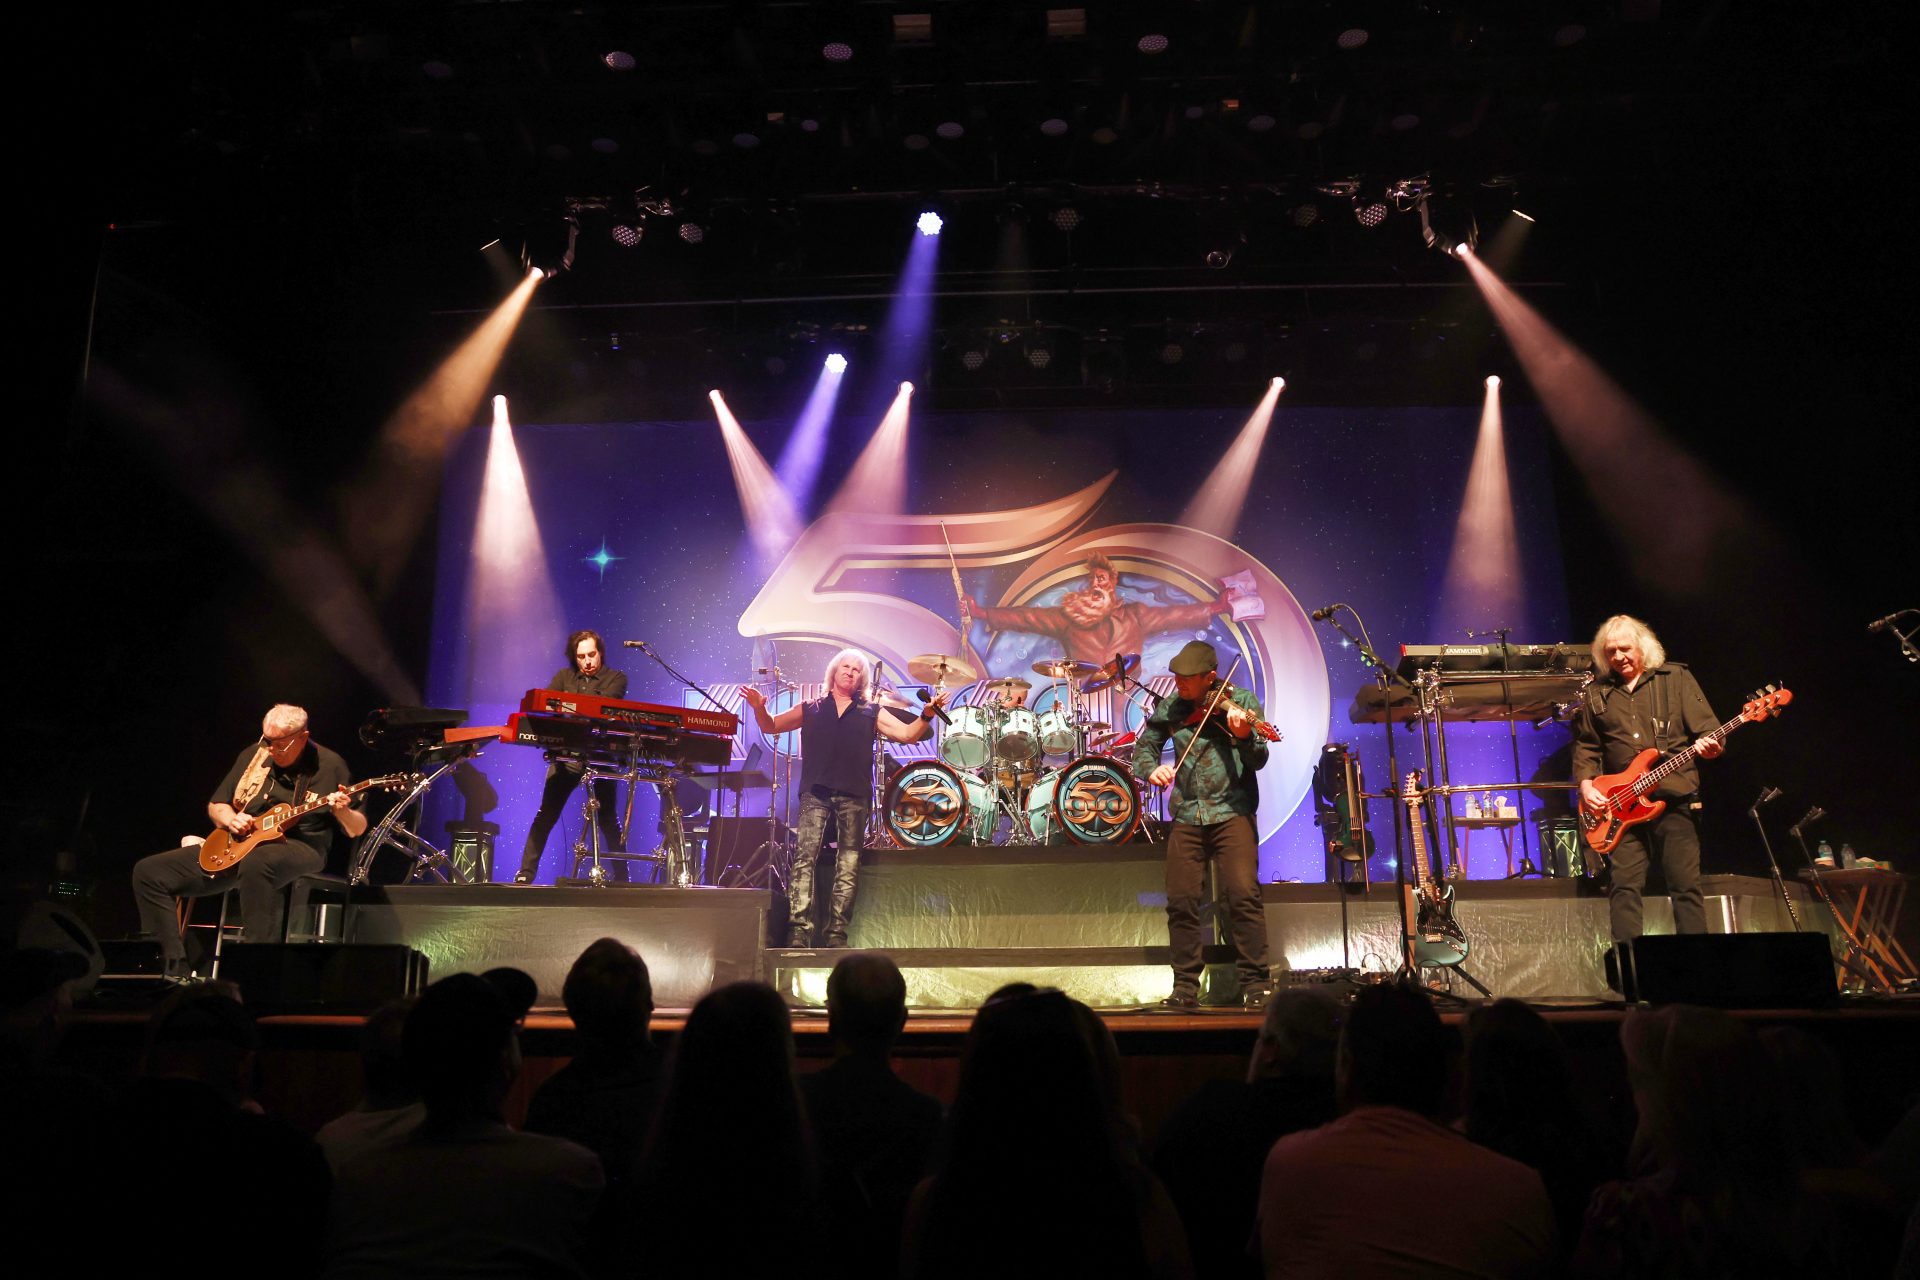 <p>After its big hits in the 1970s, Kansas has continued to perform and record albums. The composition of the group has varied, but they still tour and are currently celebrating their 50th anniversary. The most recent album of Kansas came out in 2020: 'The Absence of Presence'.</p> <p><a href="https://www.msn.com/en-us/channel/source/Showbizz%20Daily%20English/sr-vid-w8hcuhvu3f8qr5wn5rk8xhsu5x8irqrgtxcypg4uxvn7tq9vkkfa?cvid=cddbc5c4fc9748a196a59c4cb5f3d12a&ei=7" rel="noopener">Follow Showbizz Daily to see the best photo galleries every day</a></p>